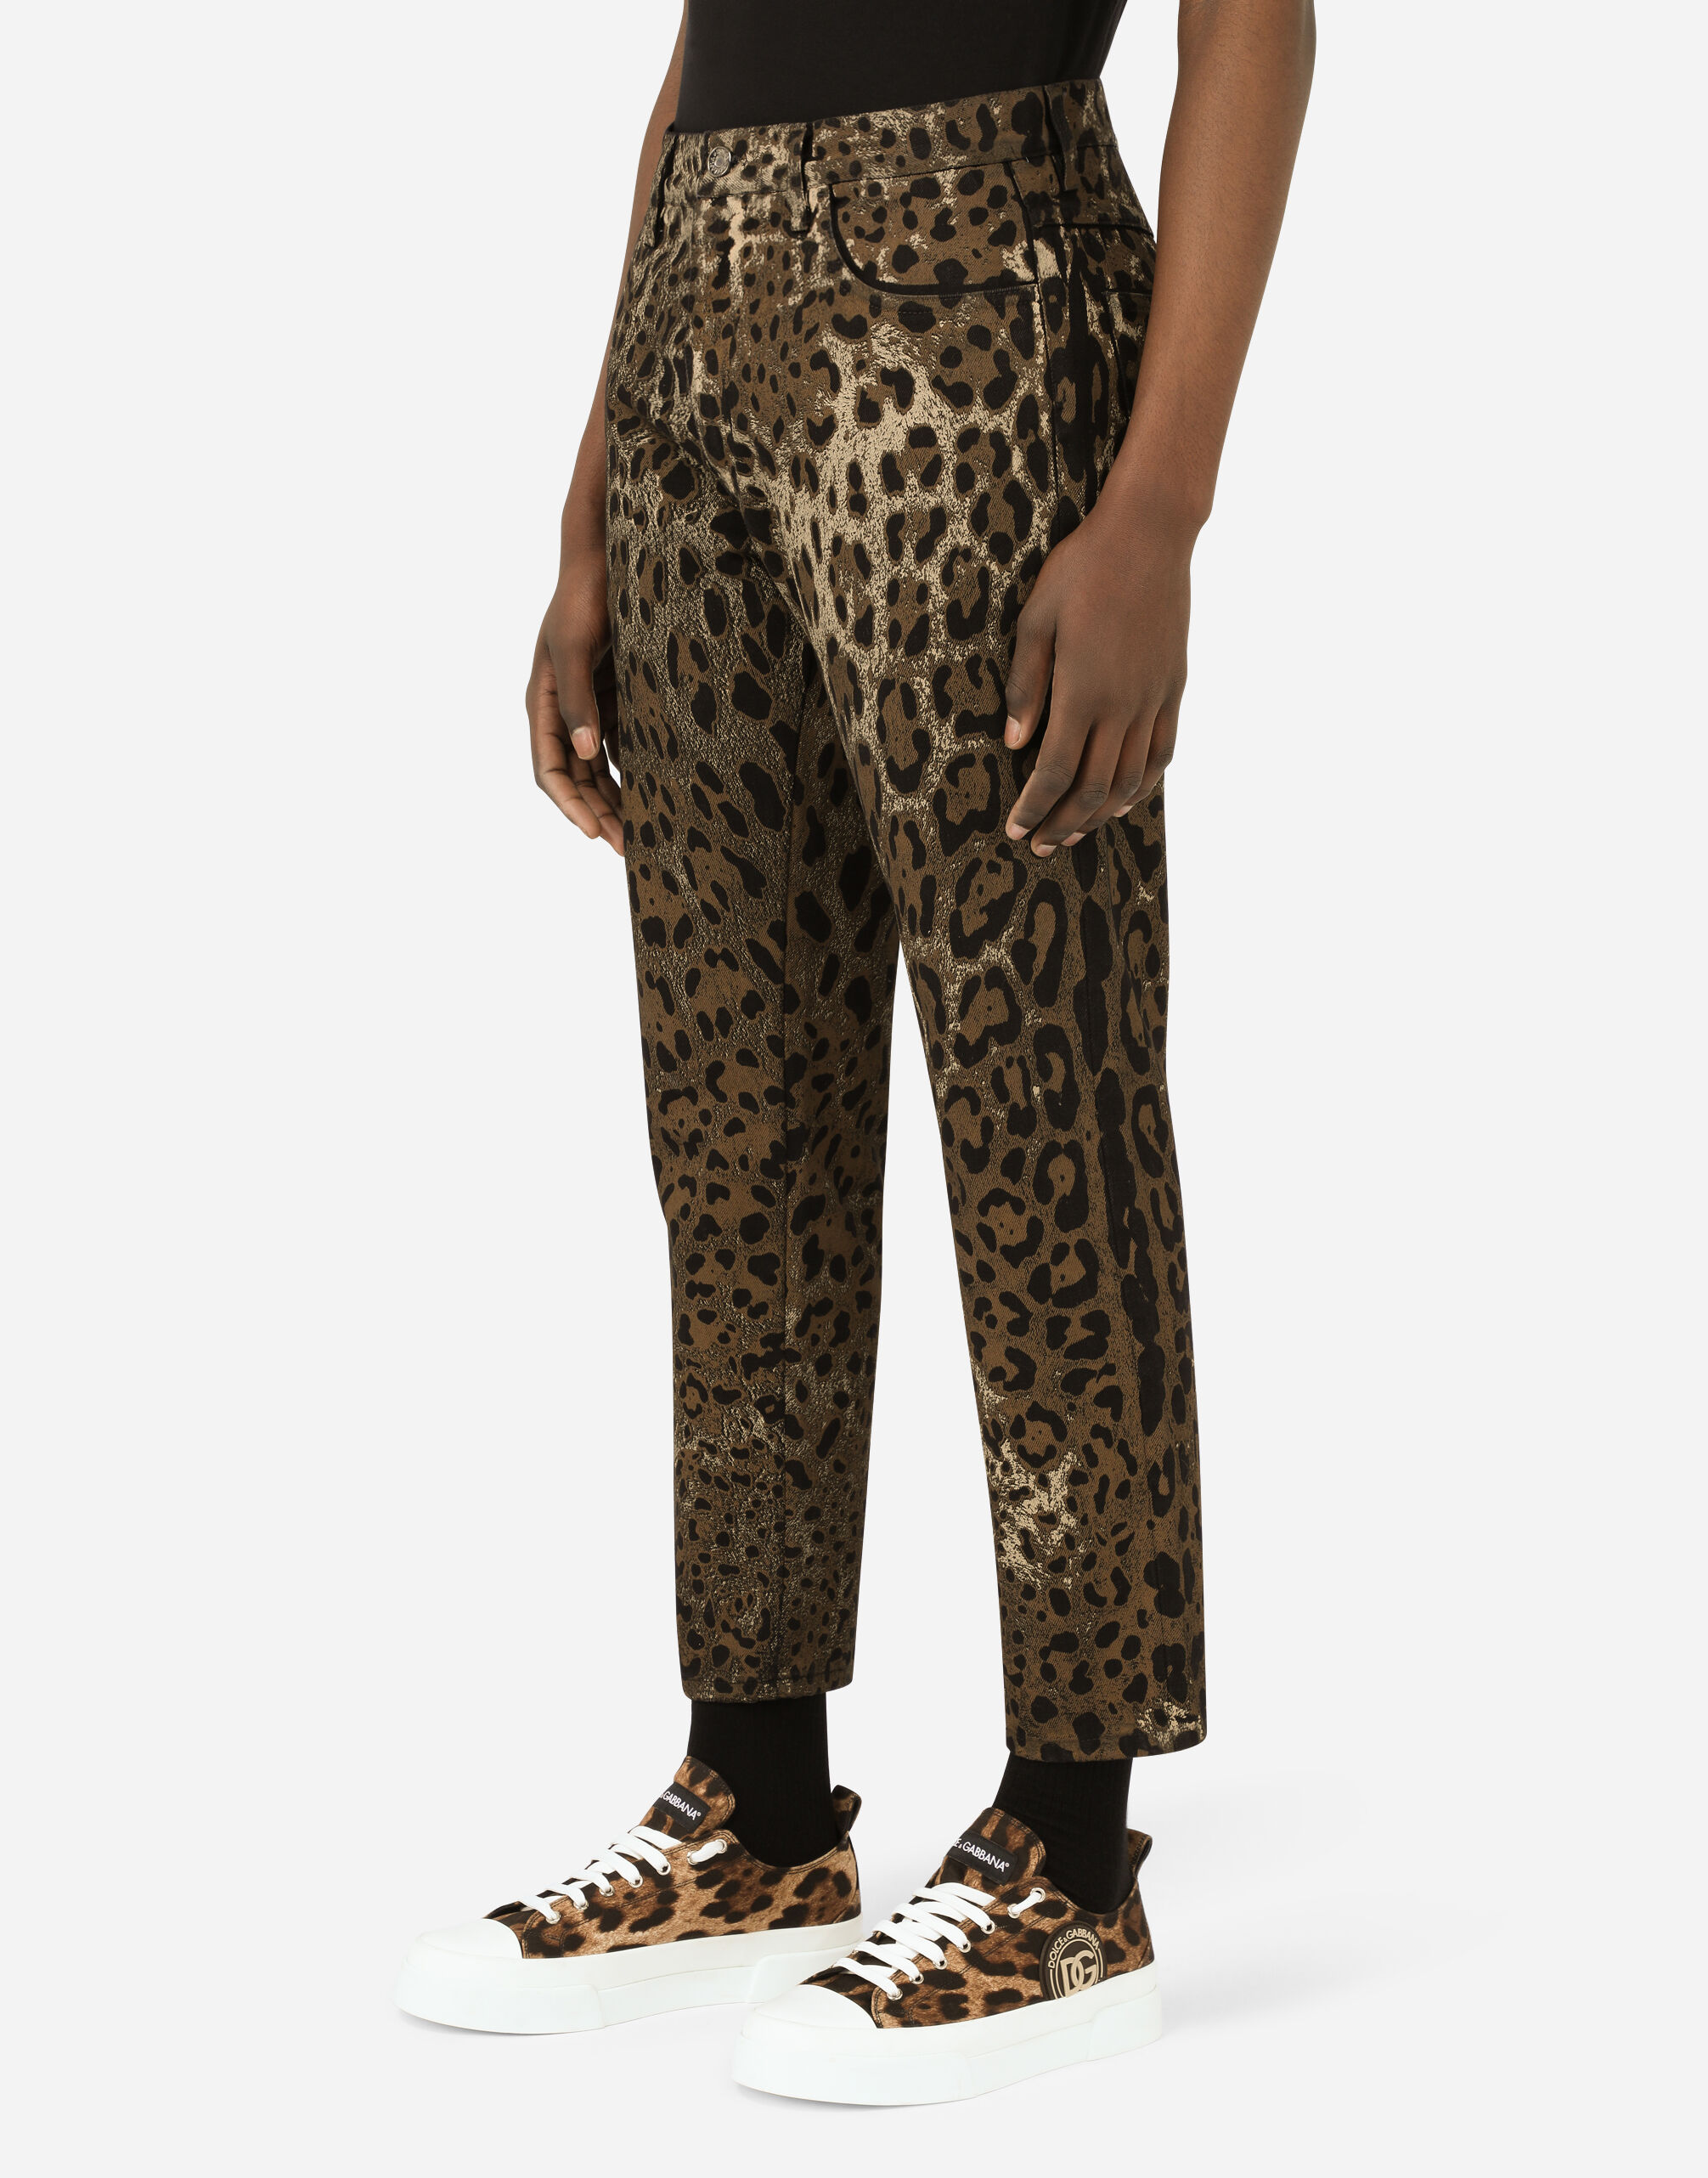 Loose jeans with DG leopard print in Multicolor for 